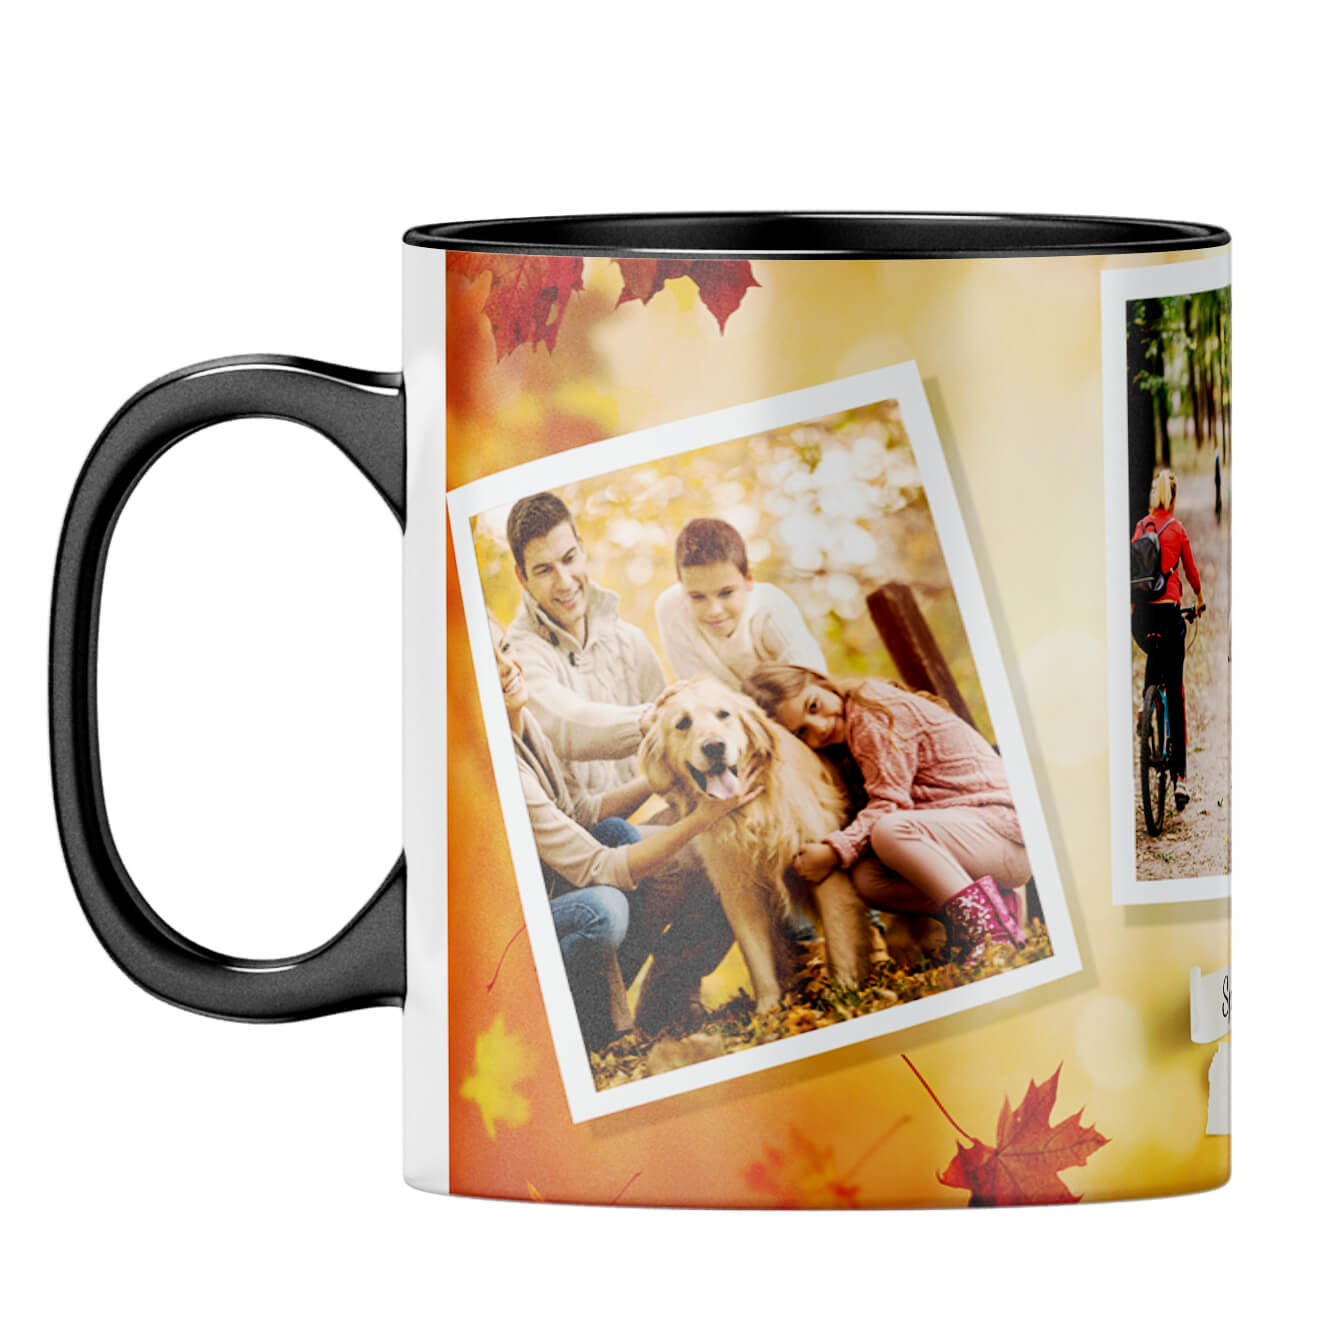 Our Very Special Moments Coffee Mug